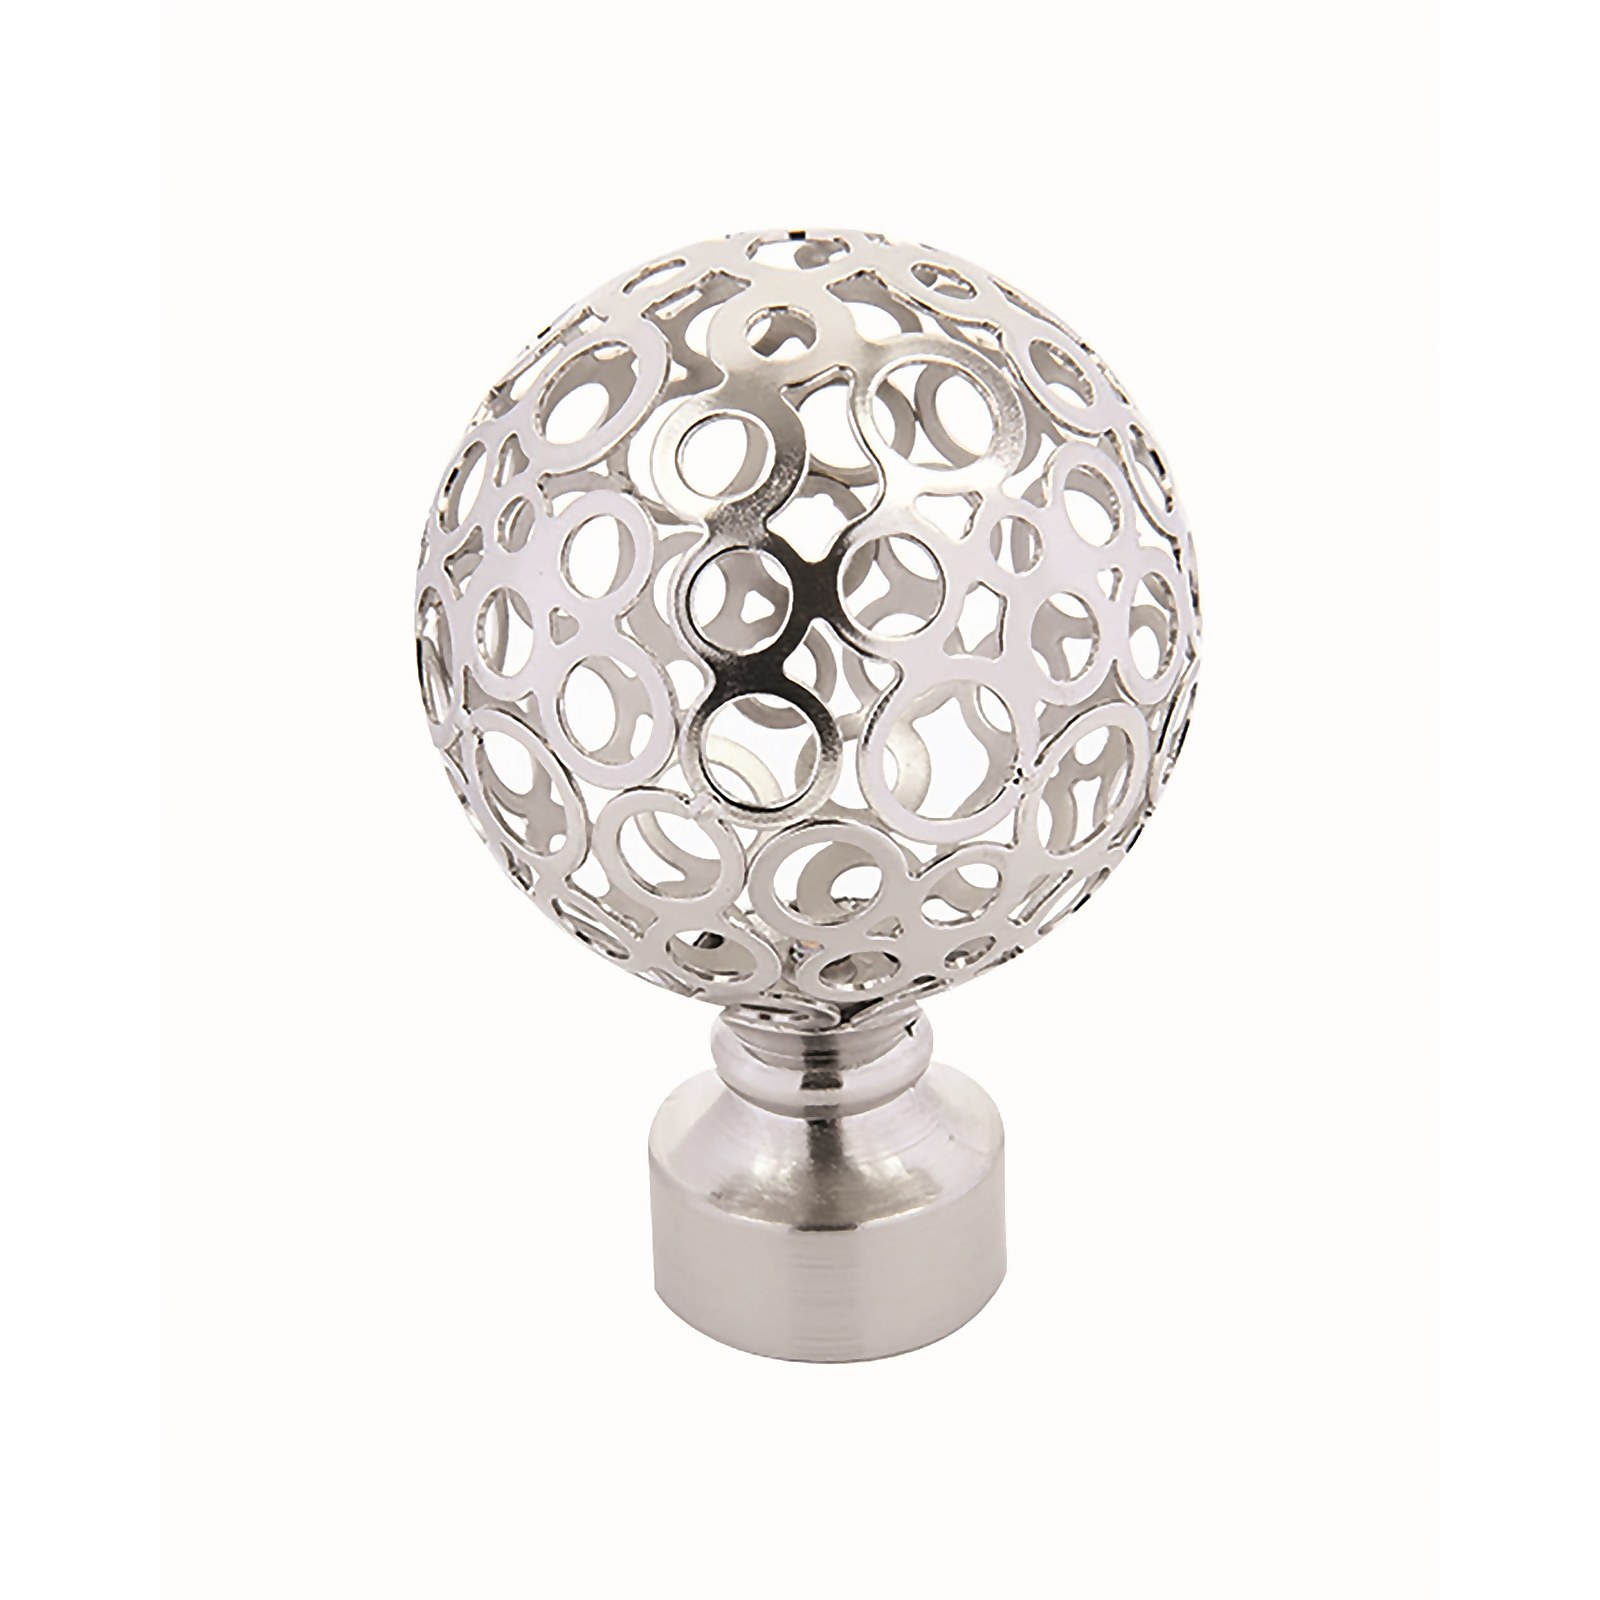 Photo of Patterned Orb Finial - Brushed Silver